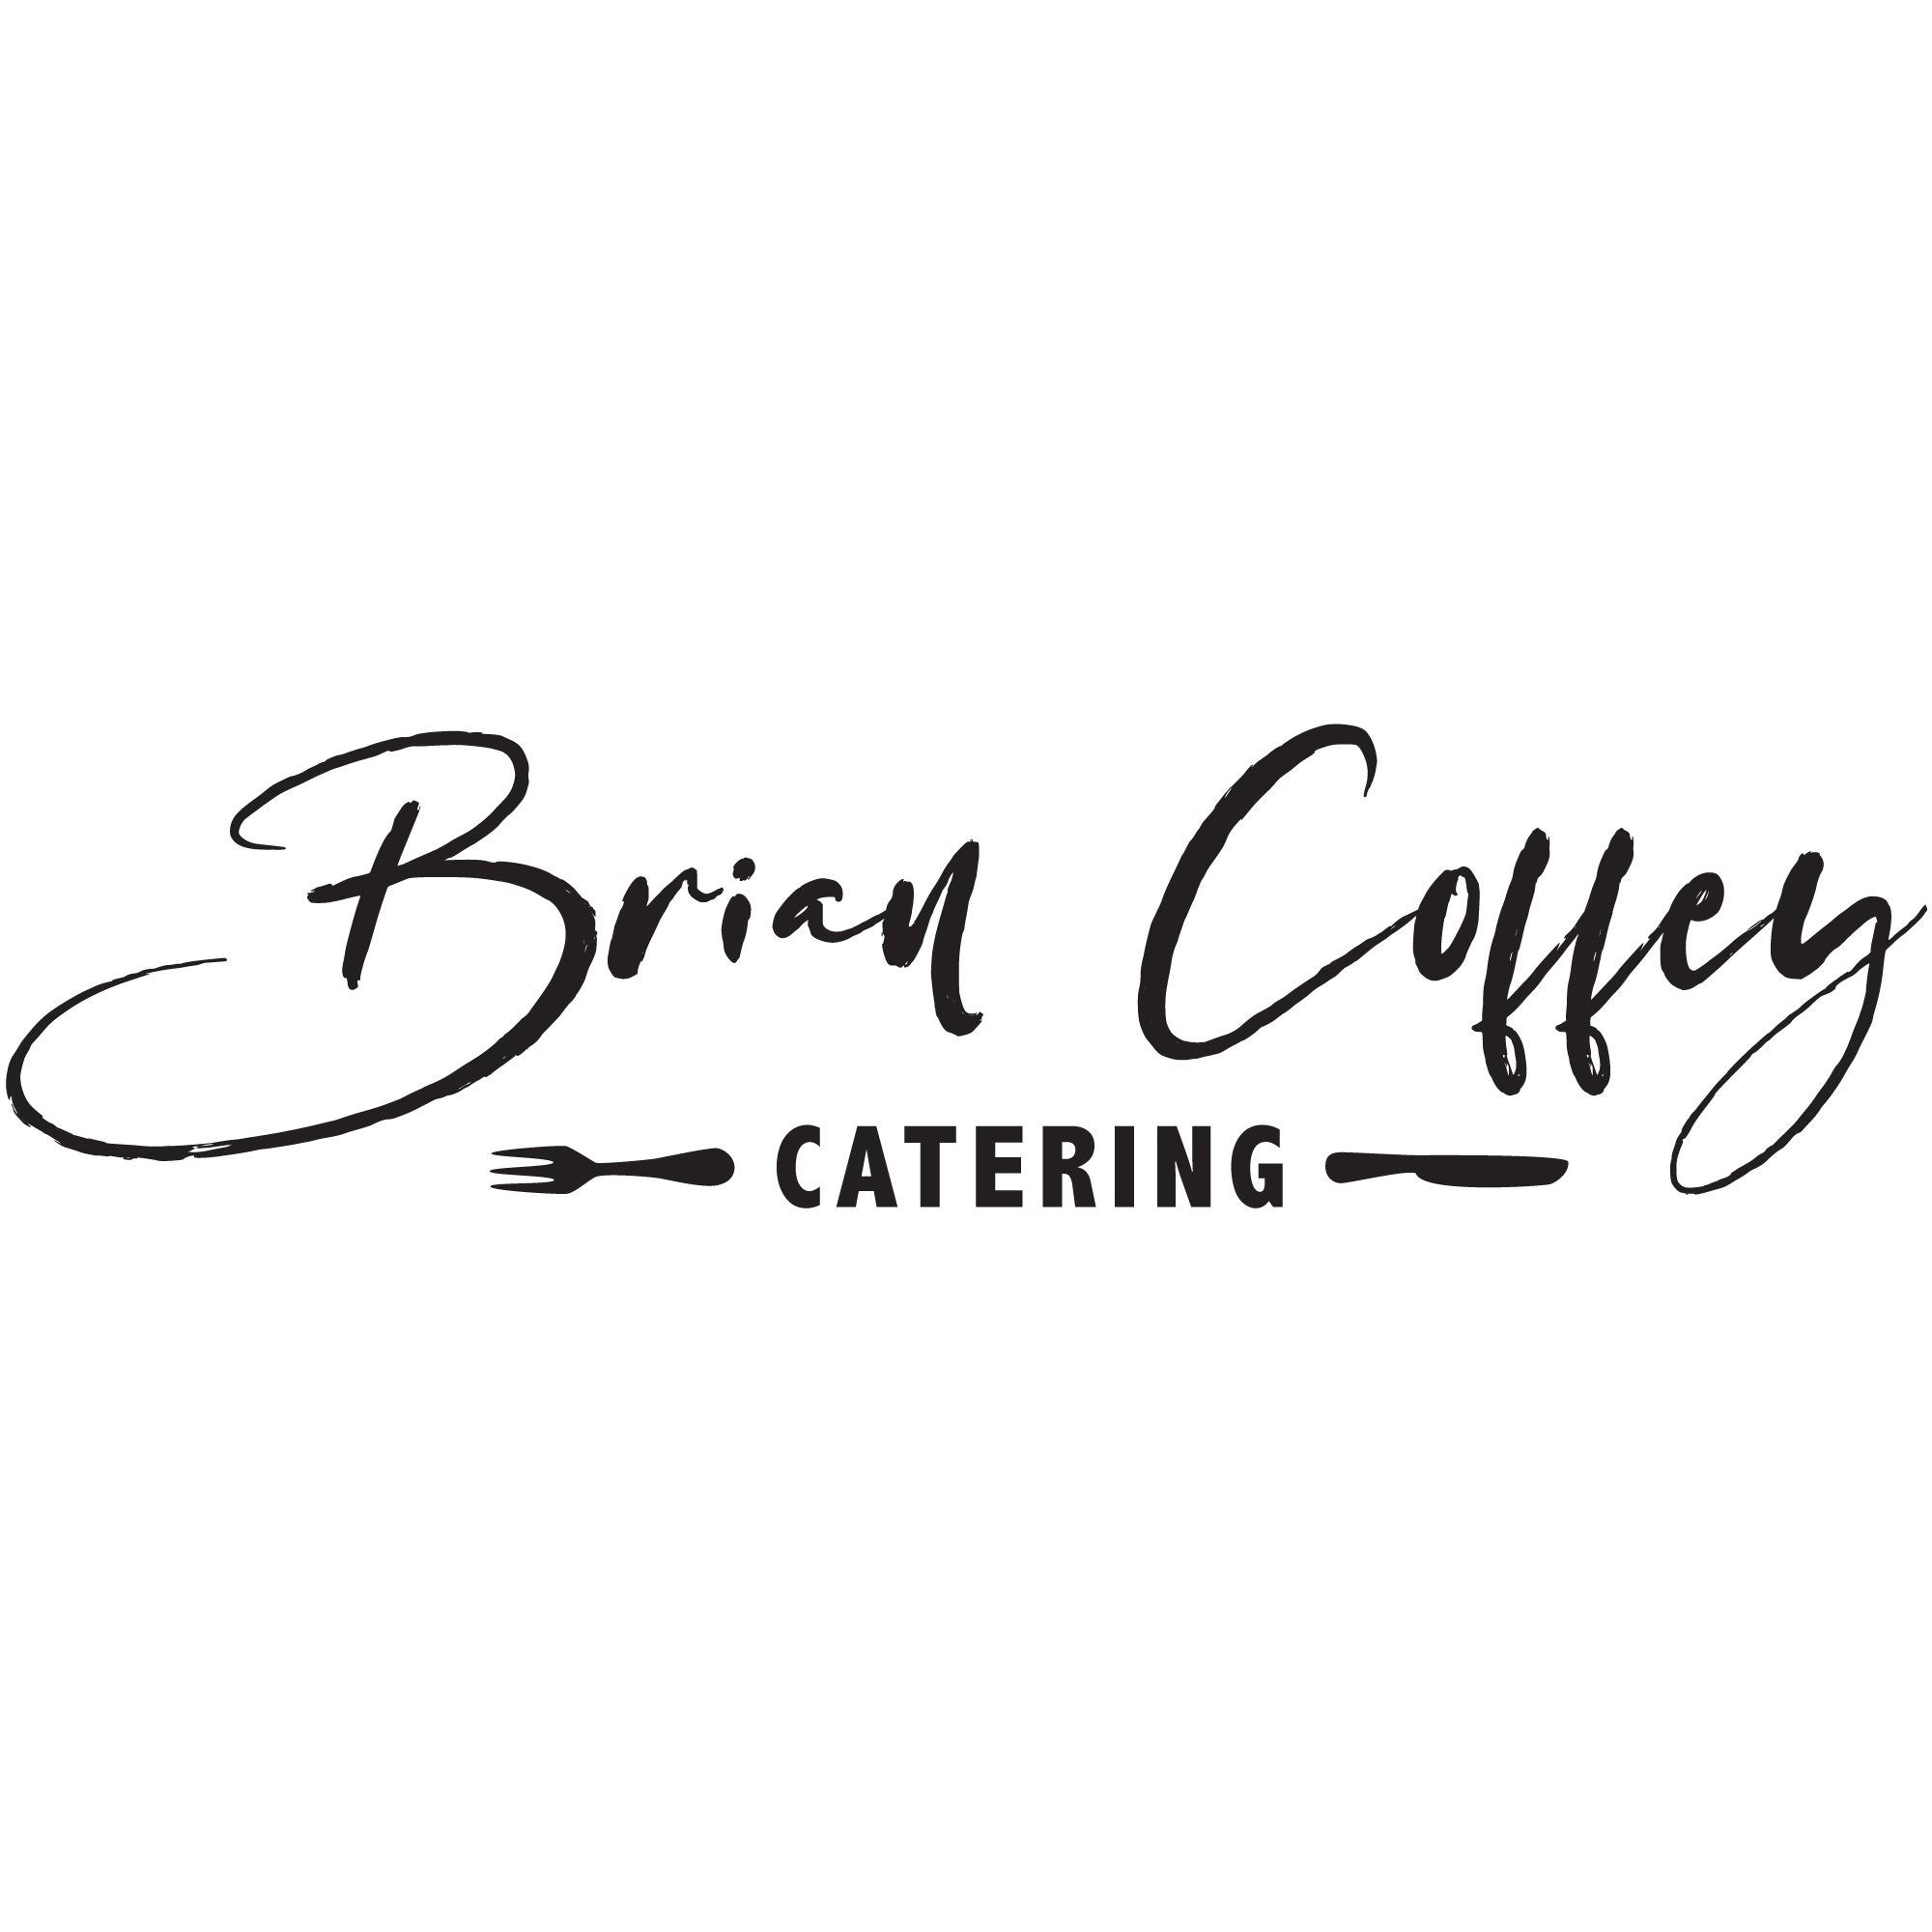 Brian Coffey Catering